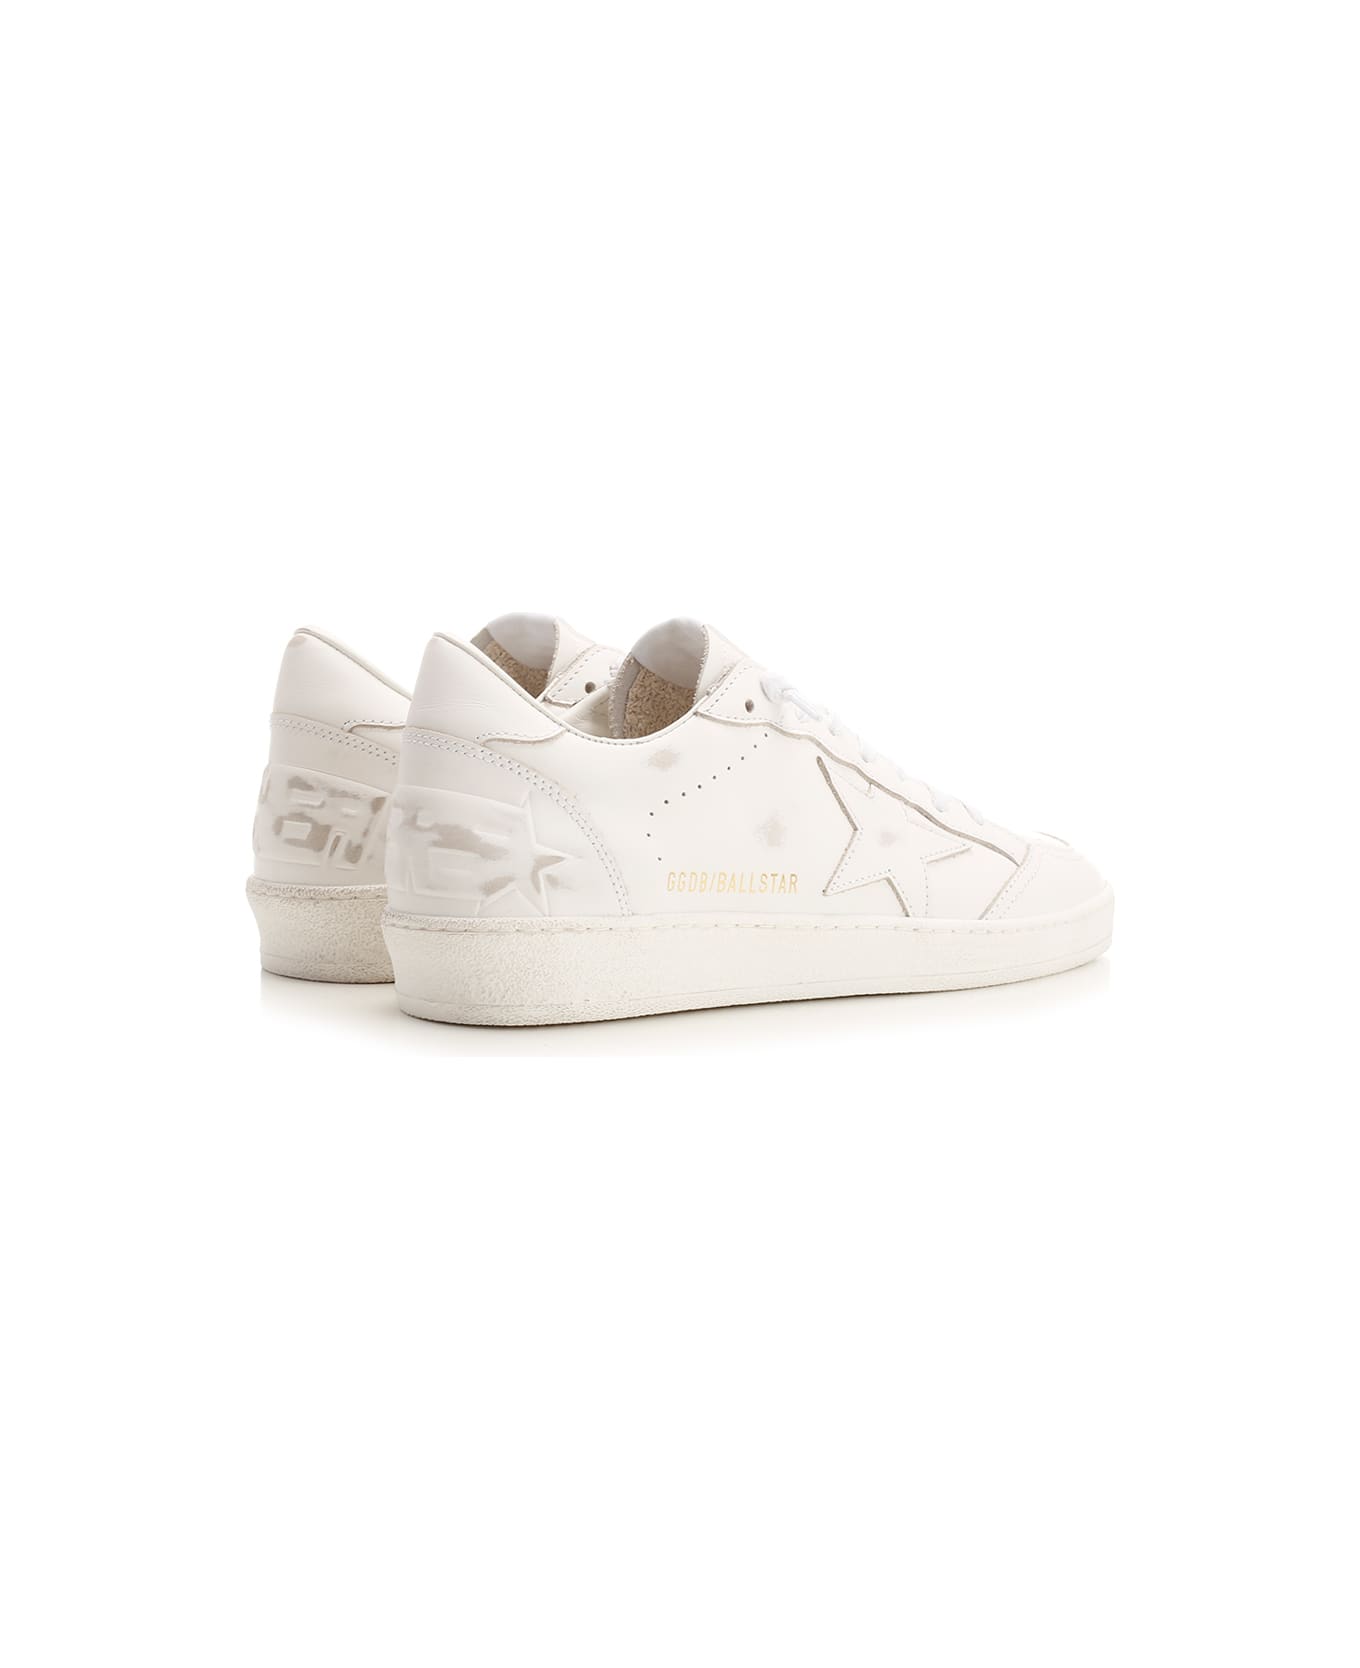 Golden Goose Ball Star Leather Sneakers - Optic White